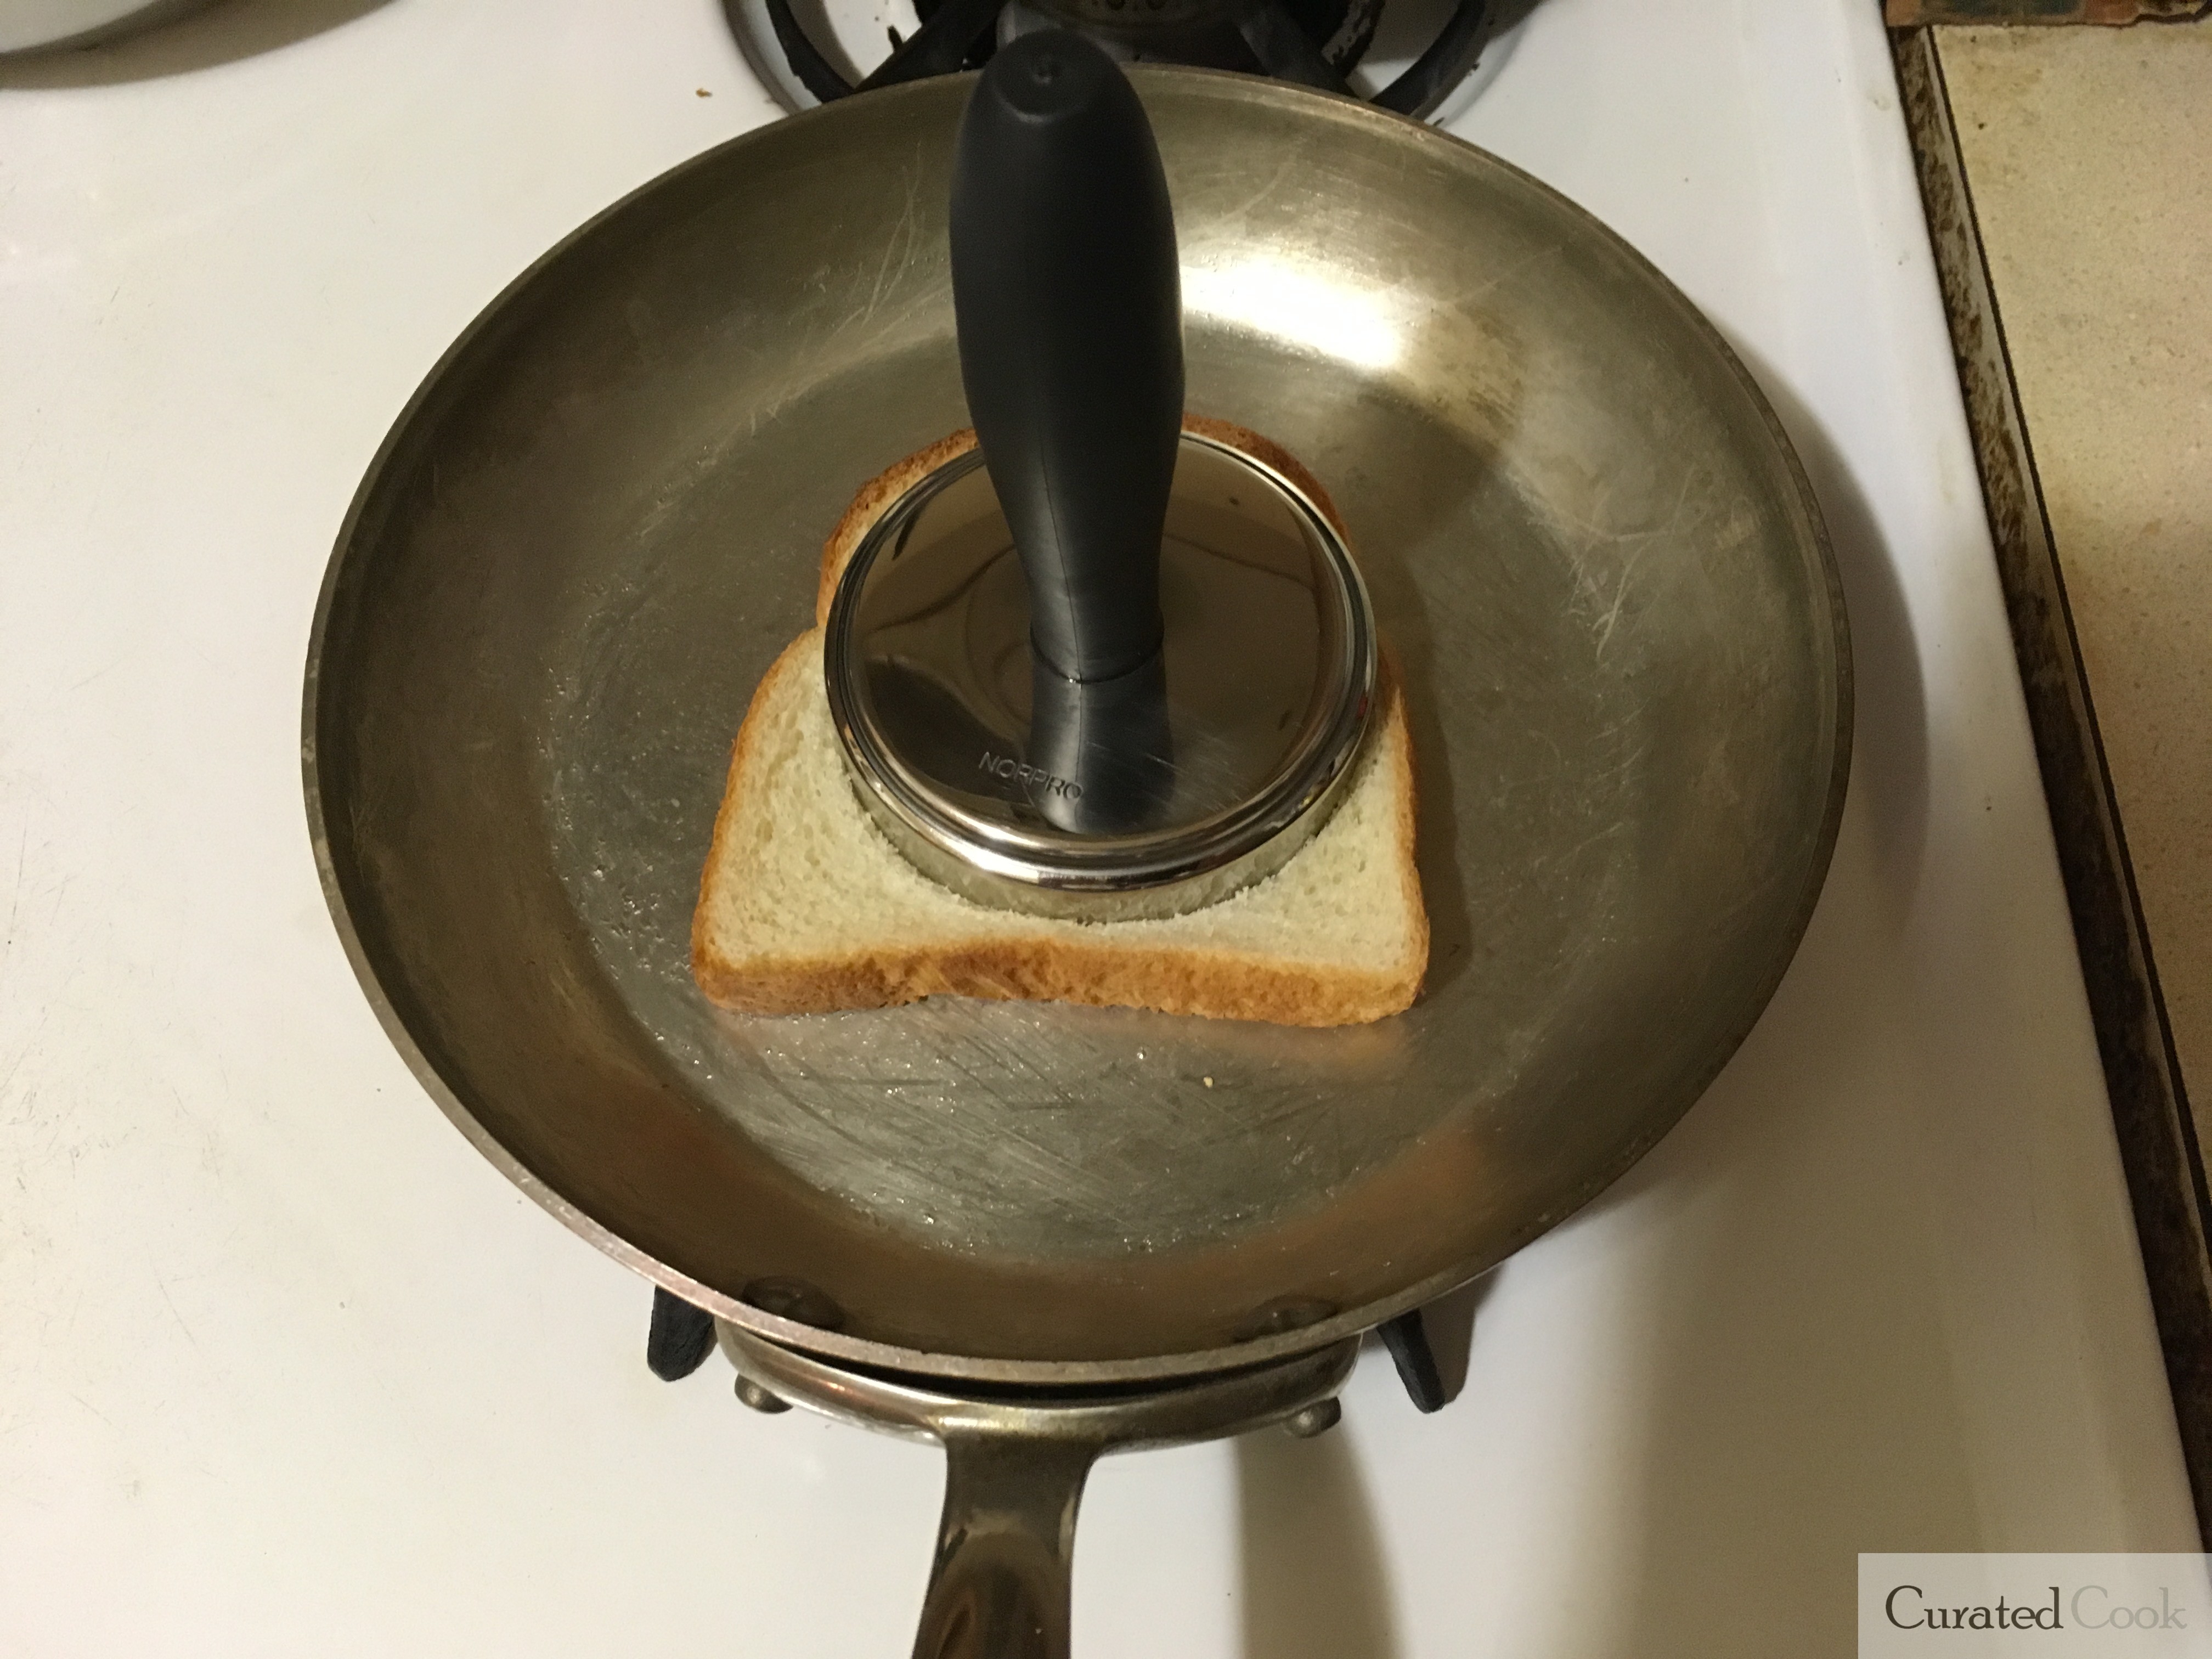 Mauviel Frying Pan Toast test